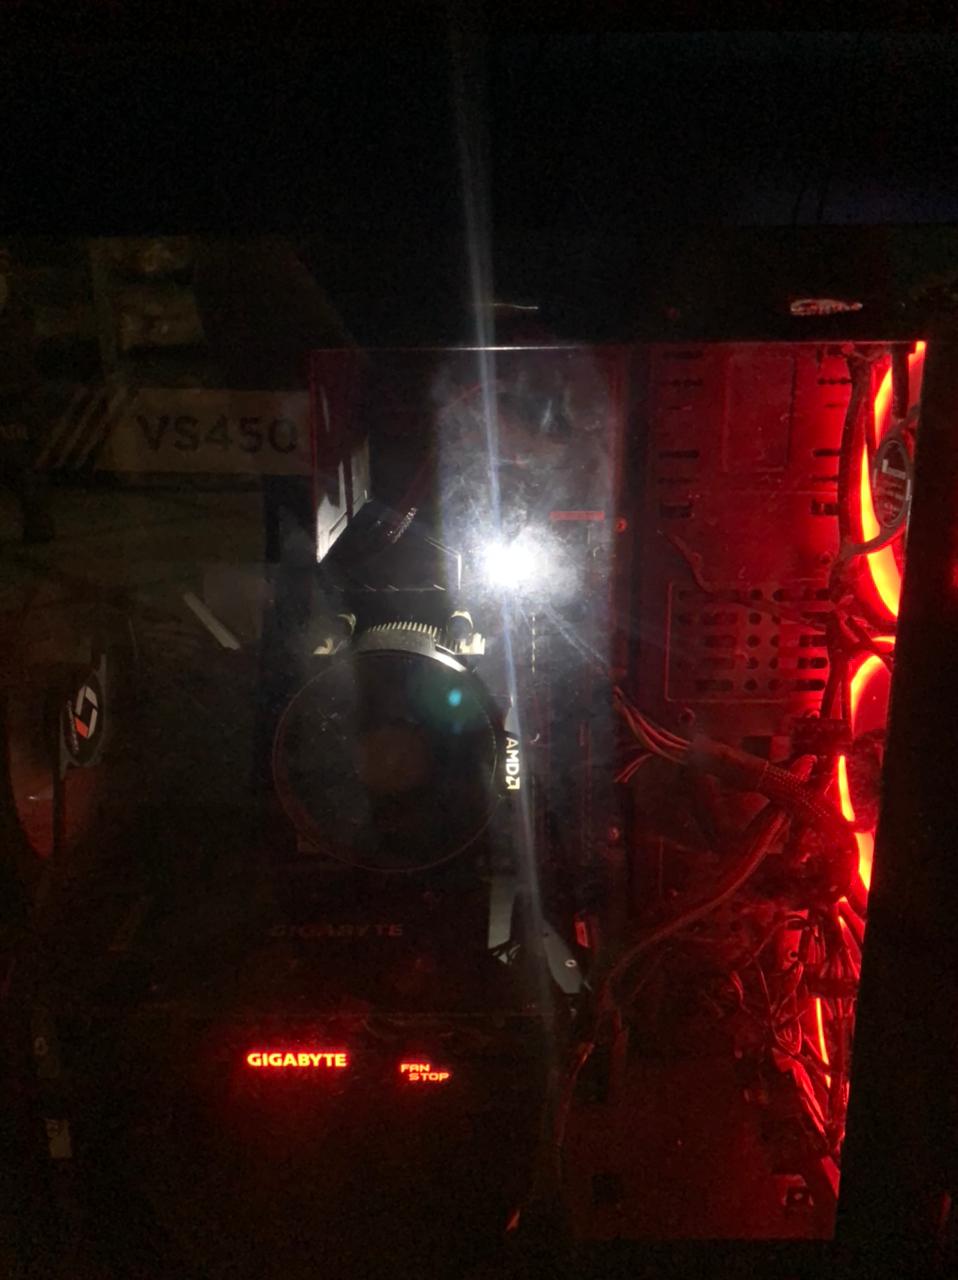 White Light on in motherboard. - Troubleshooting - Linus Tech Tips